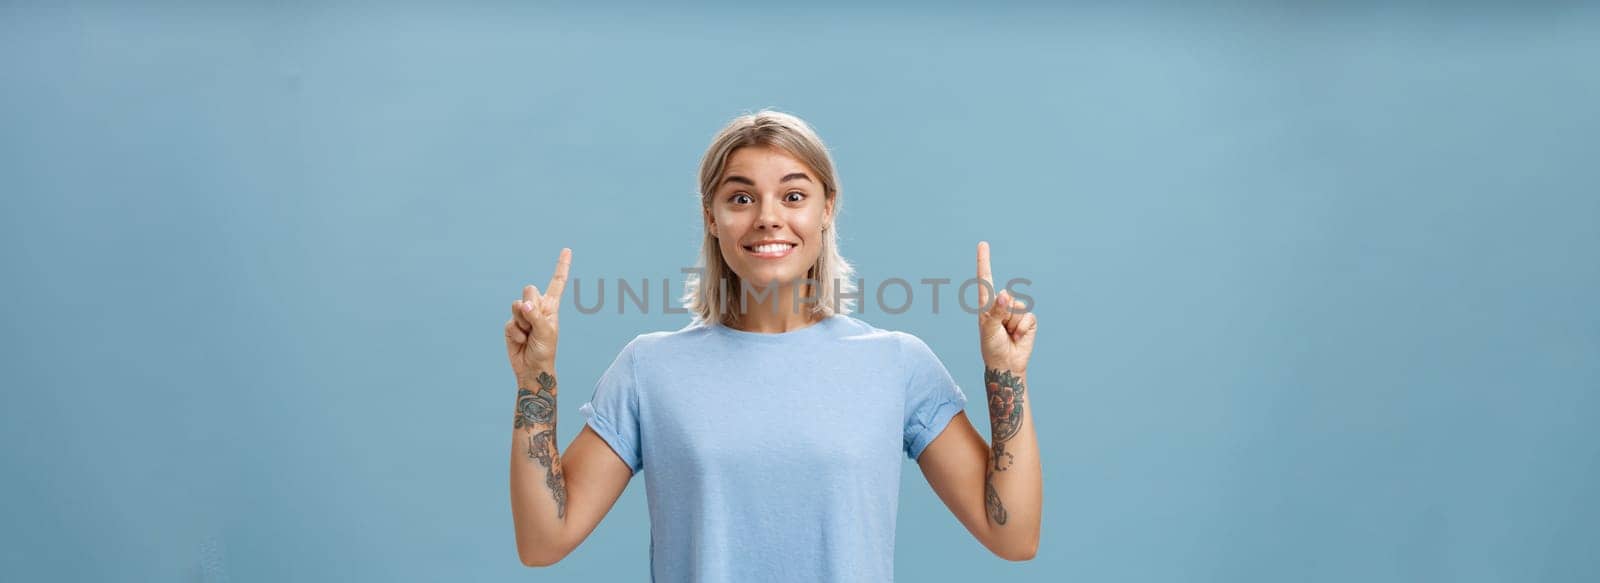 Lifestyle. Waist-up shot of excited and thrilled happy gorgeous blonde with short hairstyle and tattoos on arms smiling joyfully from amazement pointing up with raised index fingers posing over blue background.